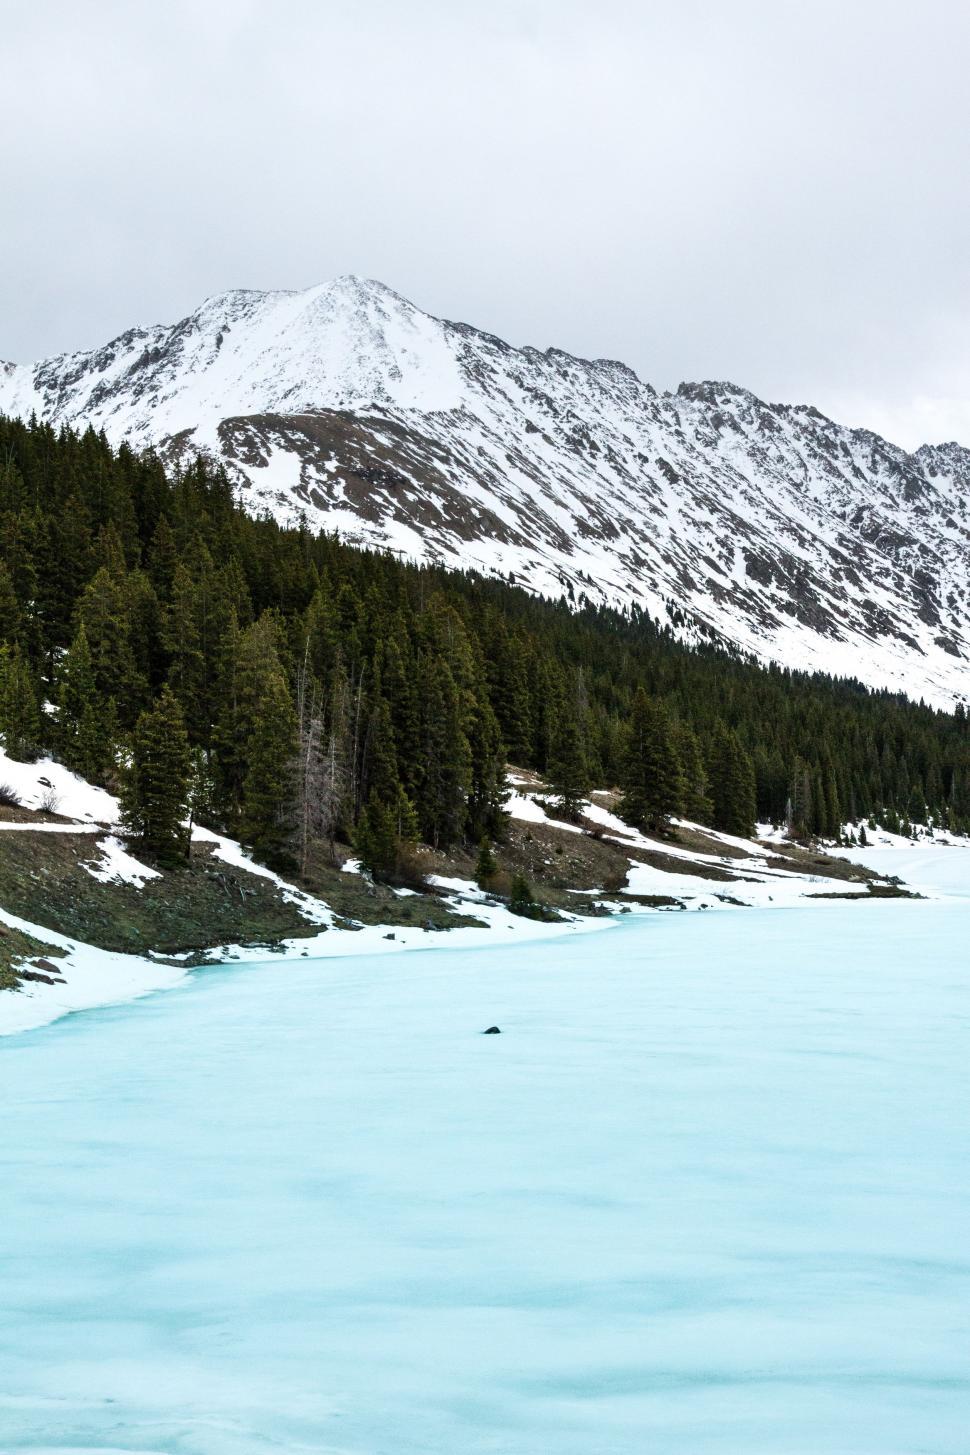 Free Image of Majestic Body of Water Surrounded by Snow Covered Mountains 